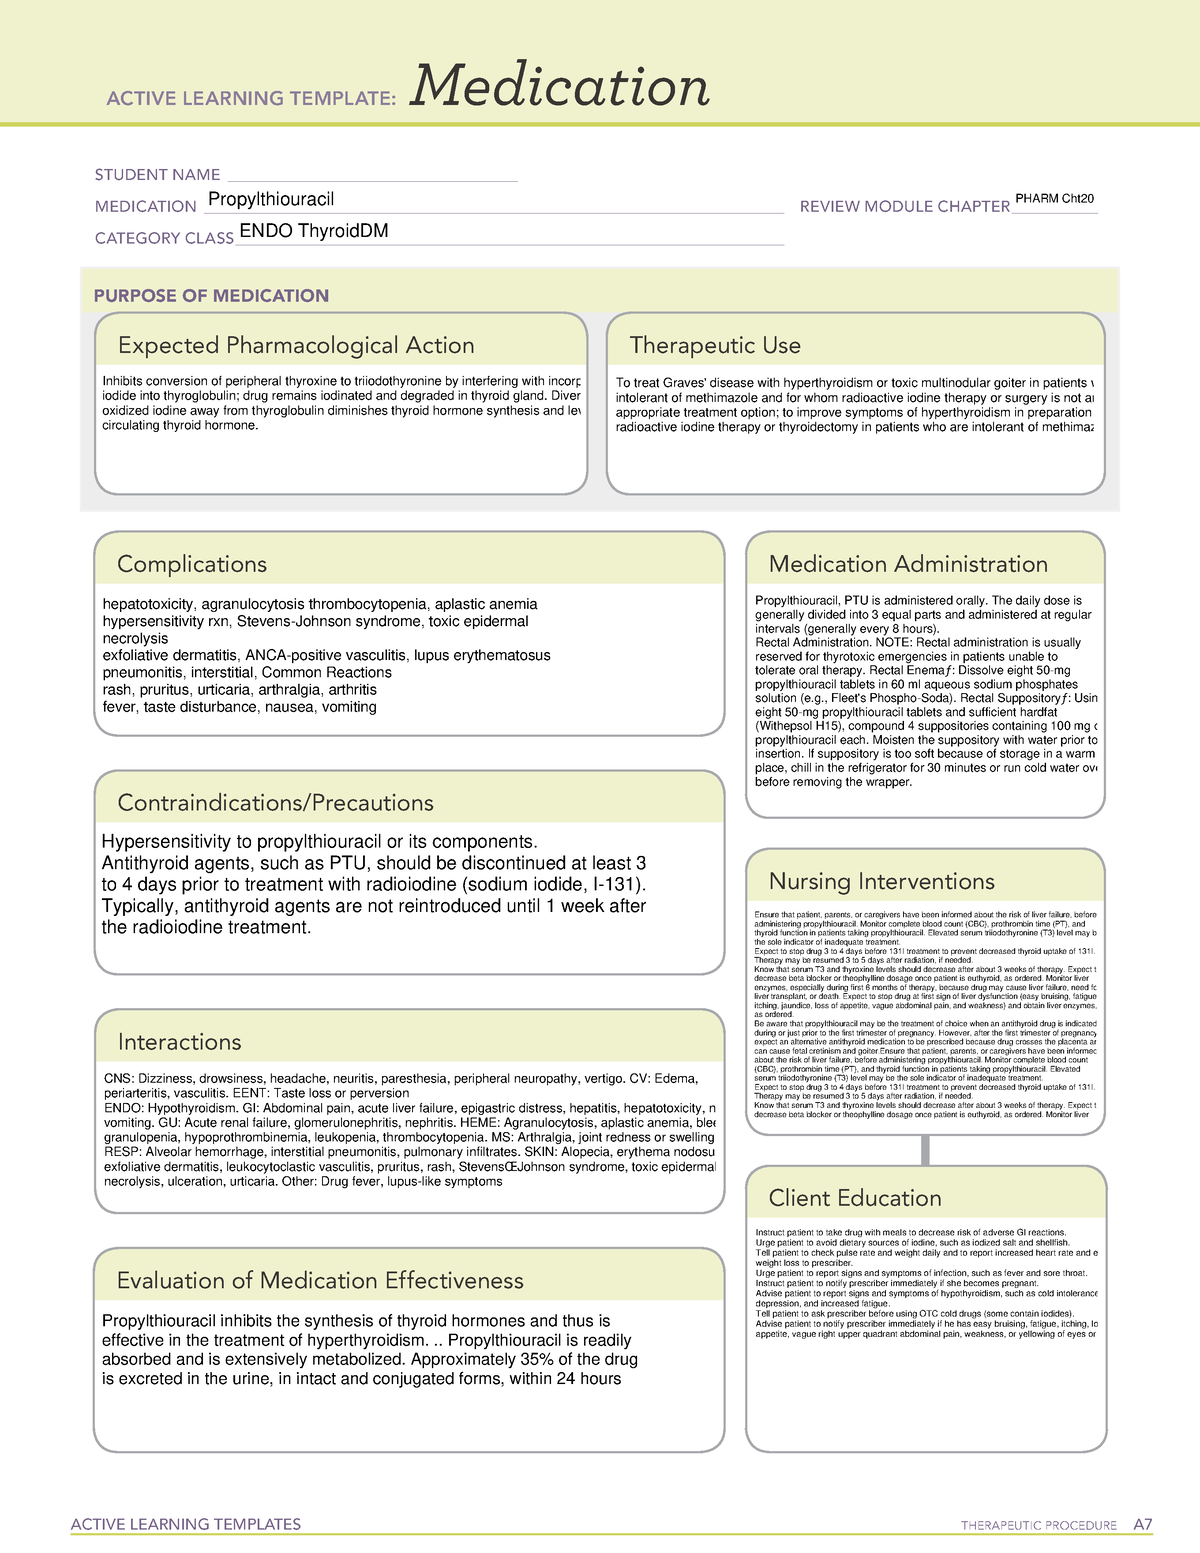 propylthiouracil-medication-active-learning-templates-therapeutic